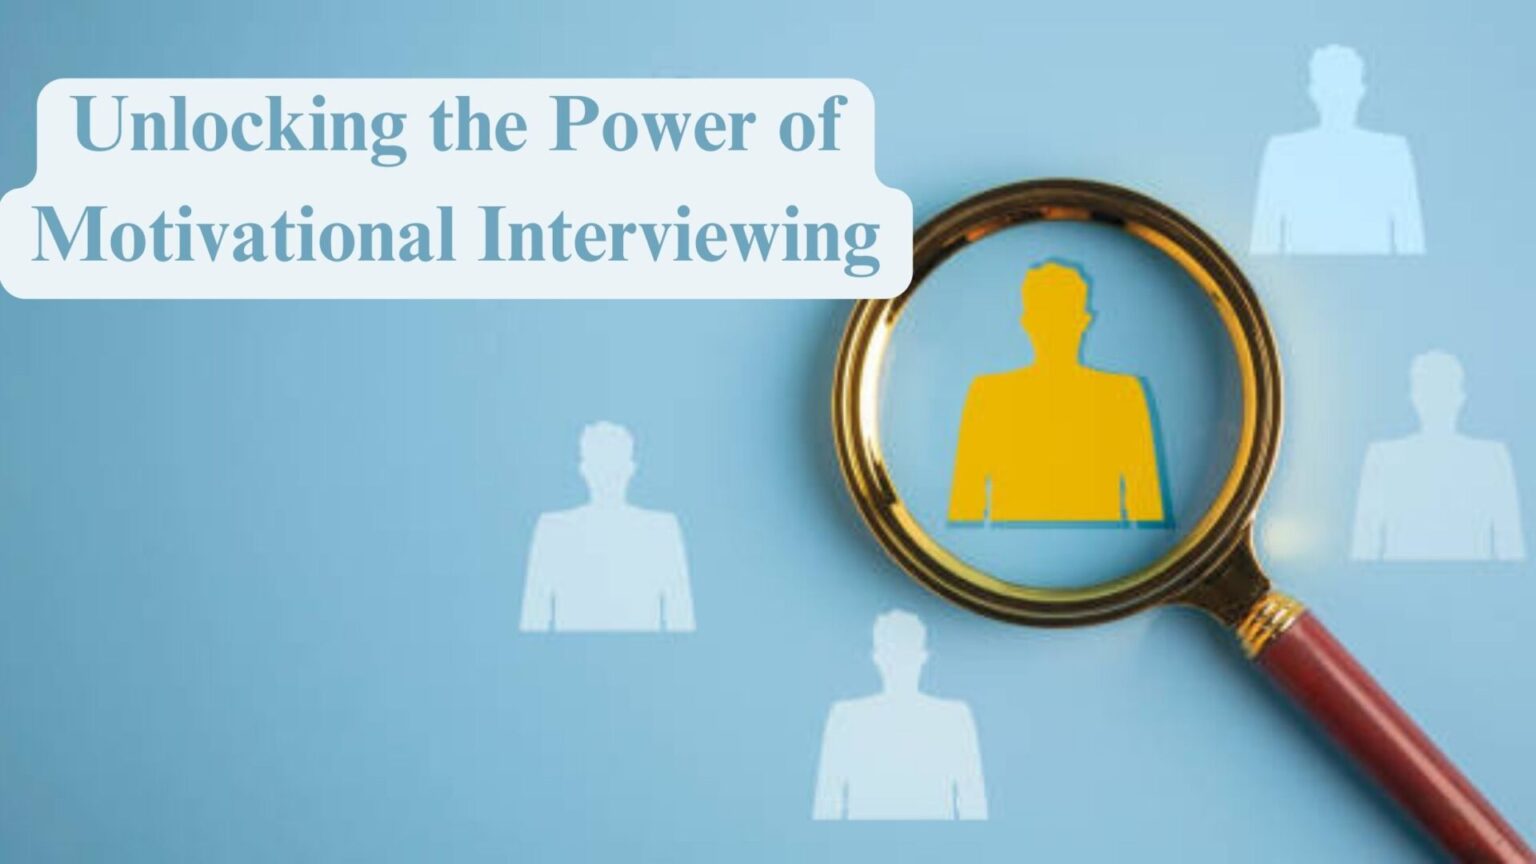 Unlocking the Power of Motivational Interviewing